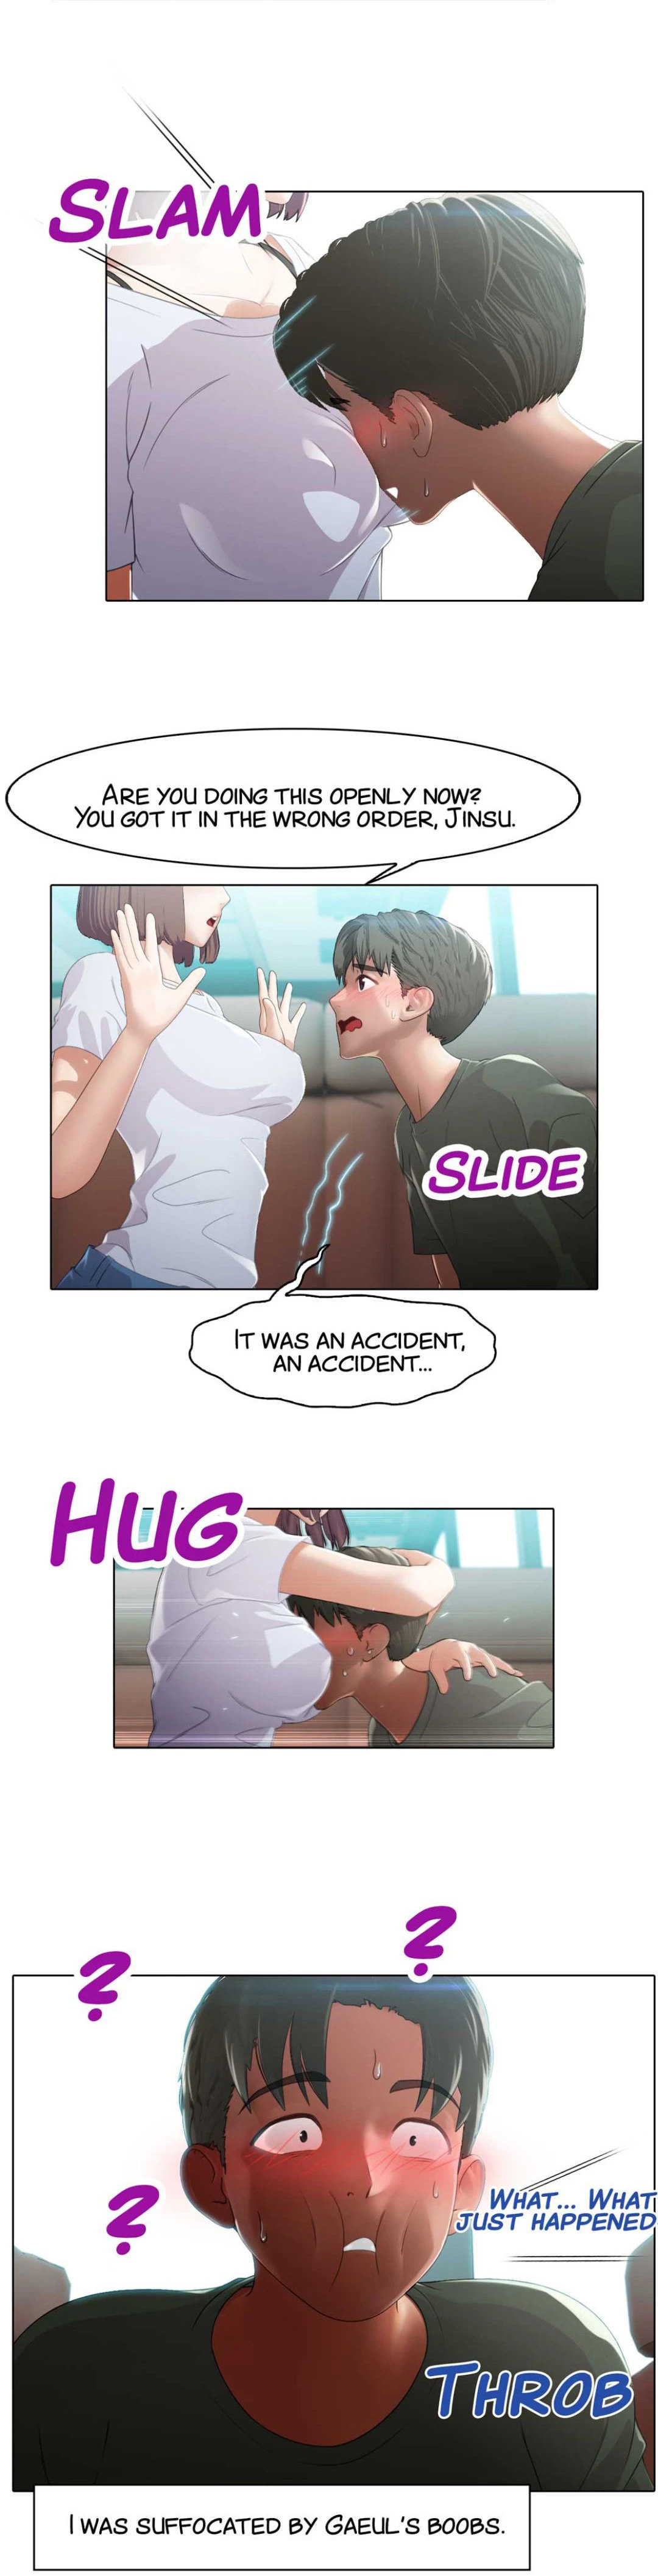 Inside the bus - Chapter 3 Page 3